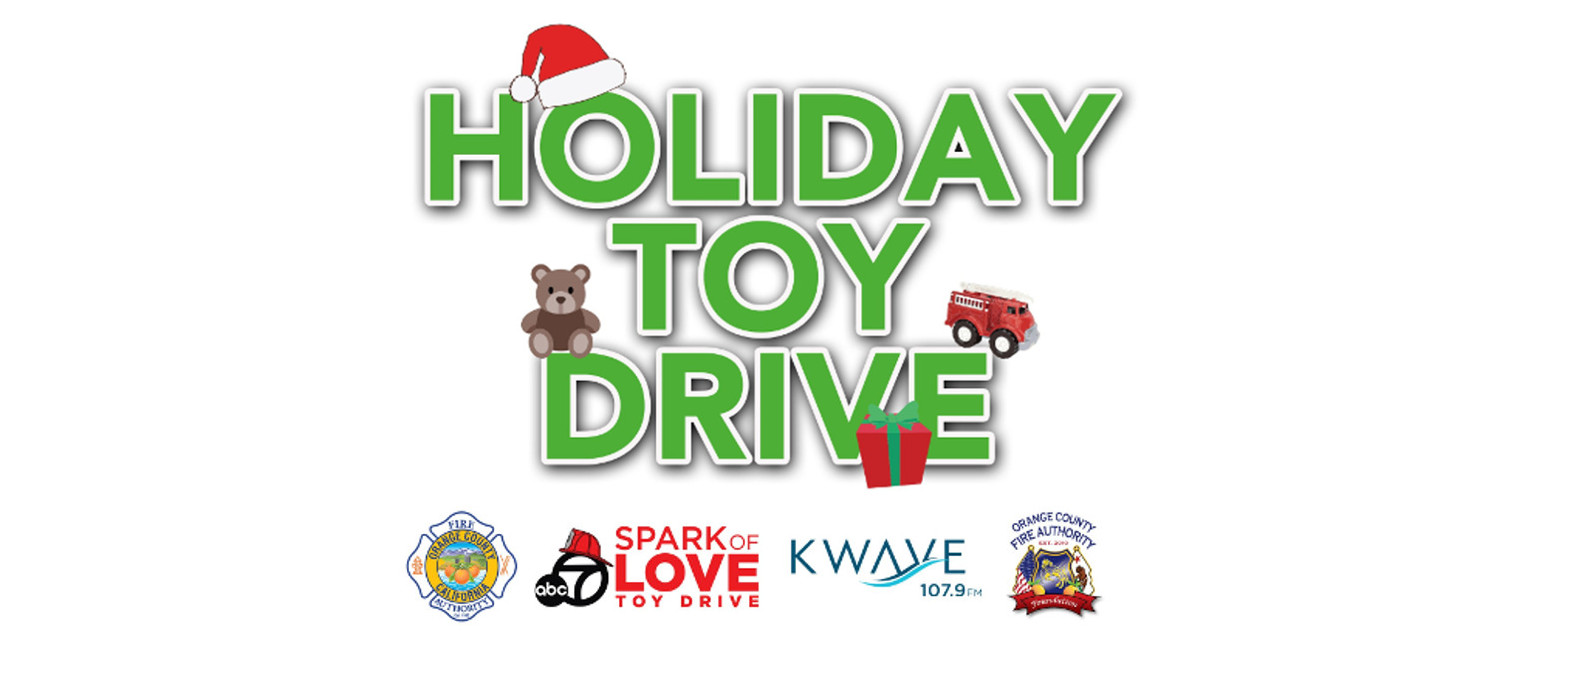 Spark of Love Holiday Toy Drive STEM Extreme